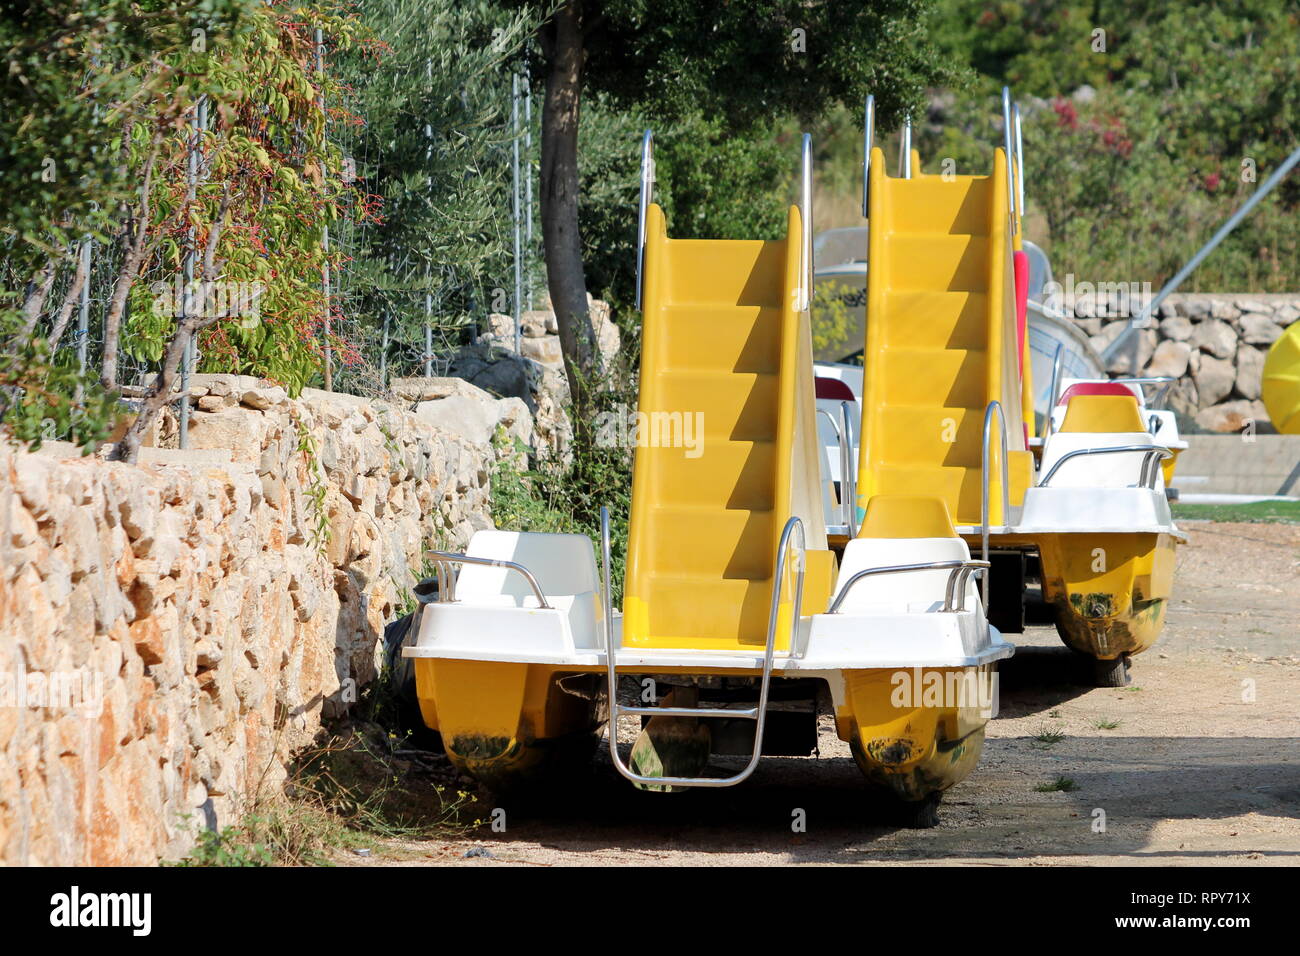 Two yellow paddle boats with plastic steps and slides in middle taken out of water for cleaning left in a row next to traditional stone wall Stock Photo